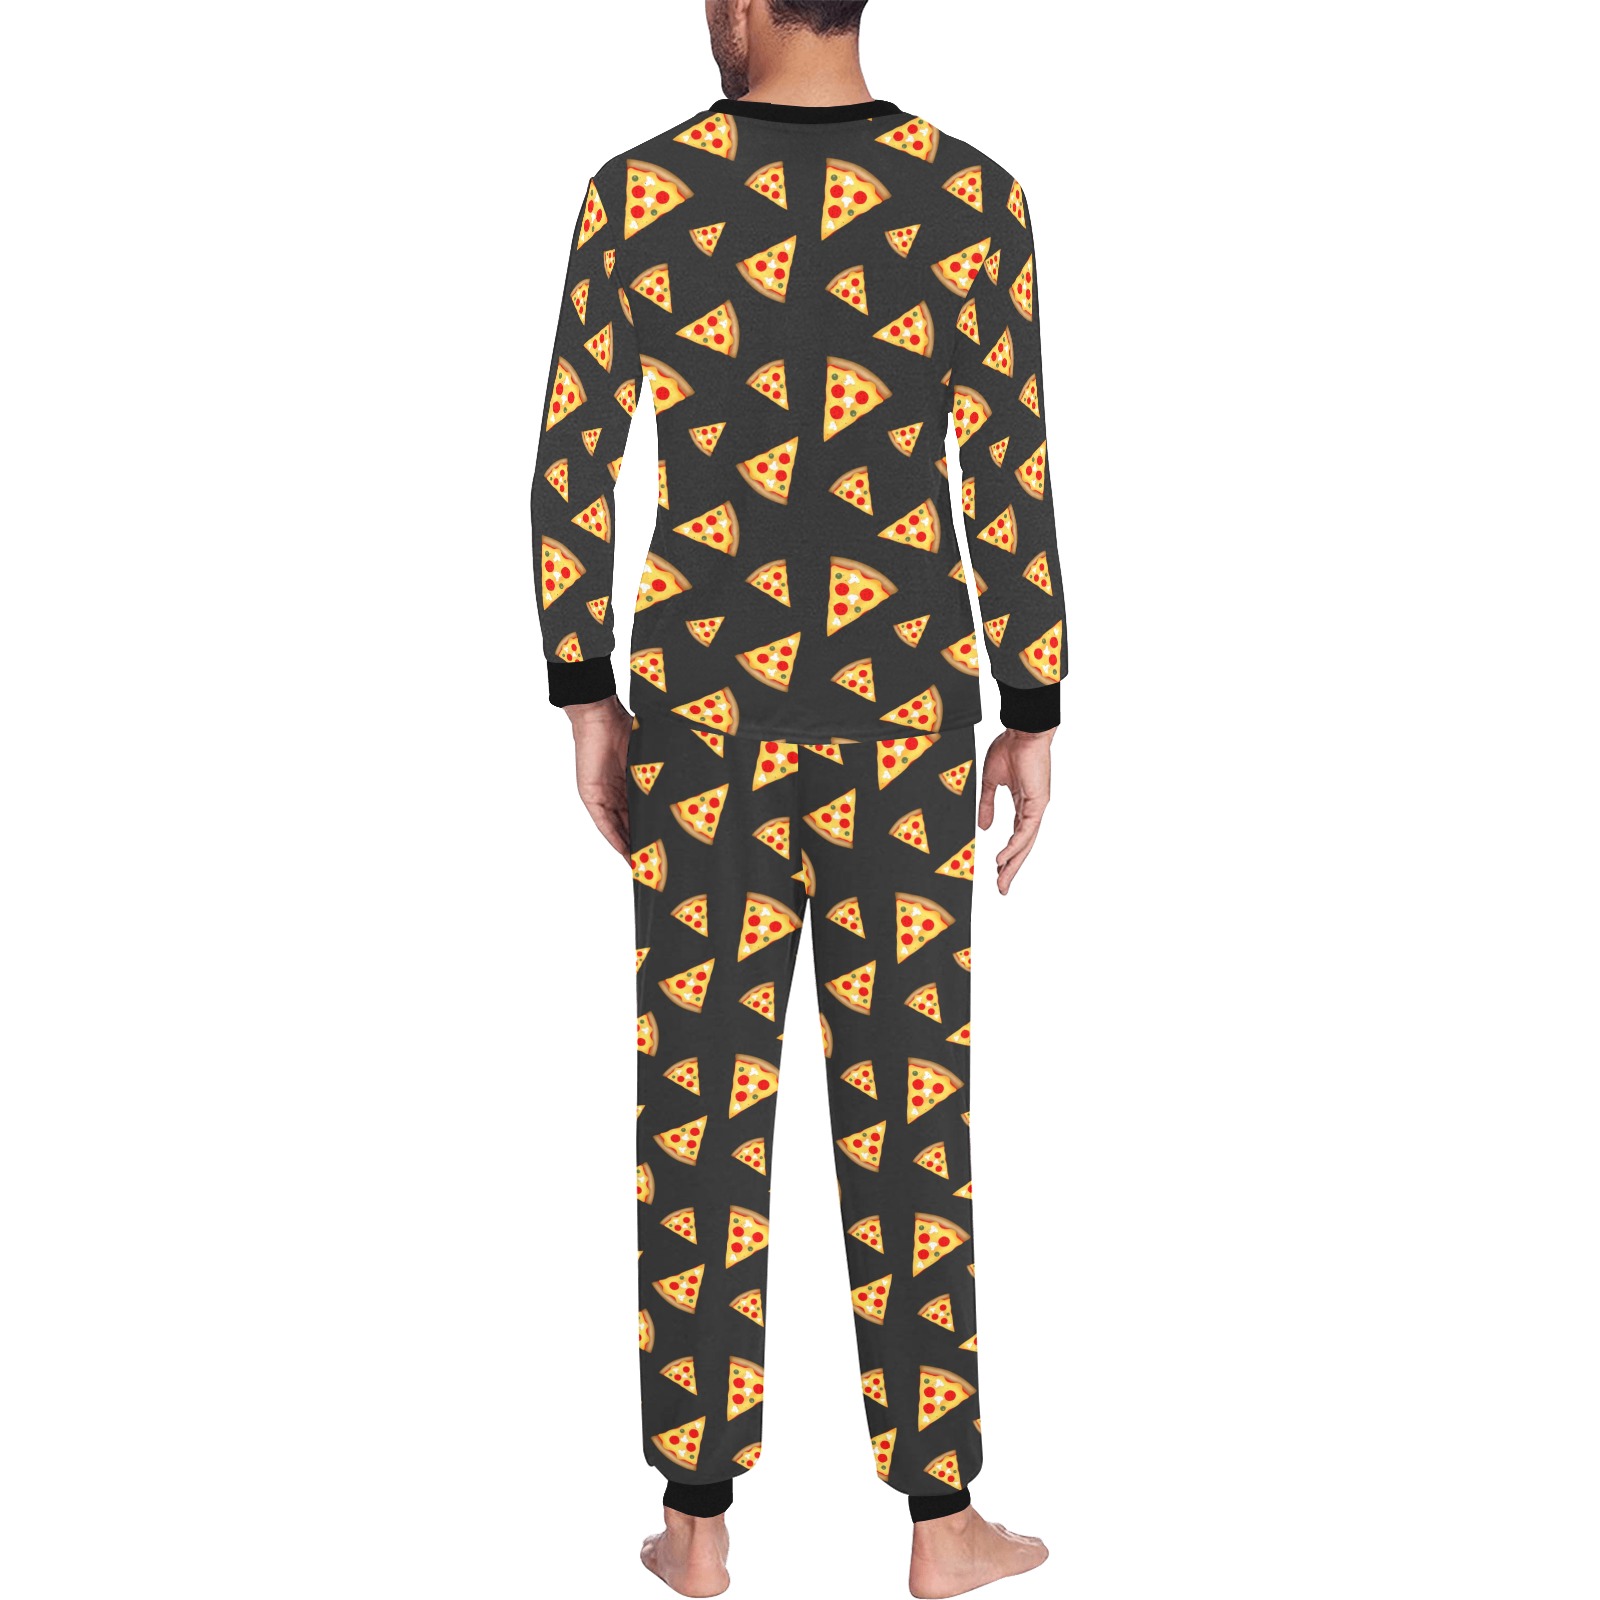 Cool and fun pizza slices dark gray pattern Men's All Over Print Pajama Set